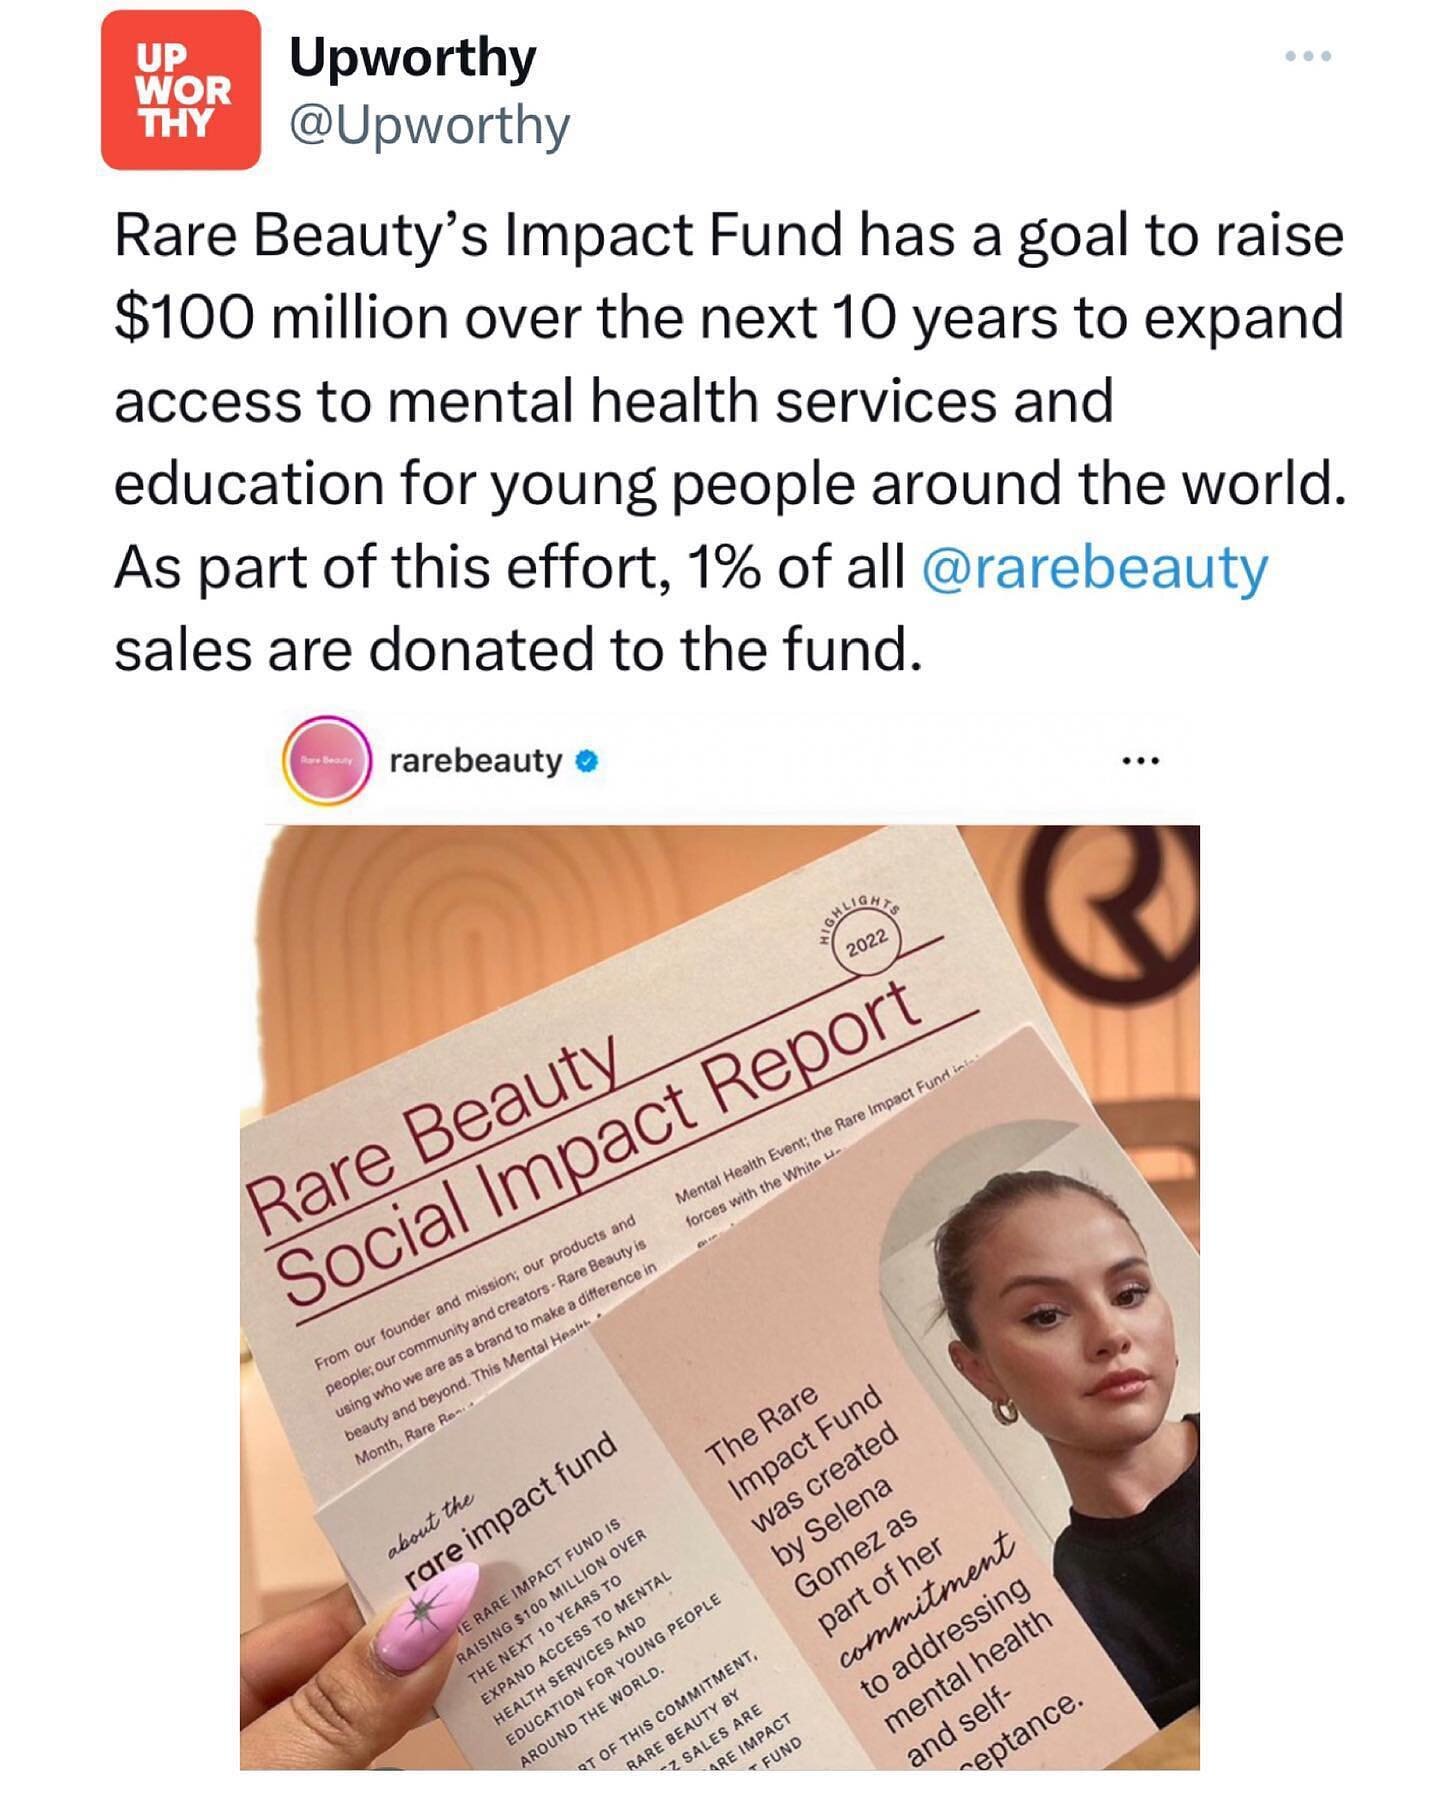 That feeling when your client is featured on @upworthy ☀️. We&rsquo;ll be at Social Innovation Summit #SIS23 on June 6-7 to hear what @ecohen817 from Rare Beauty and other social impact leaders like @afdinofrio from Robert Wood Johnson Foundation hav